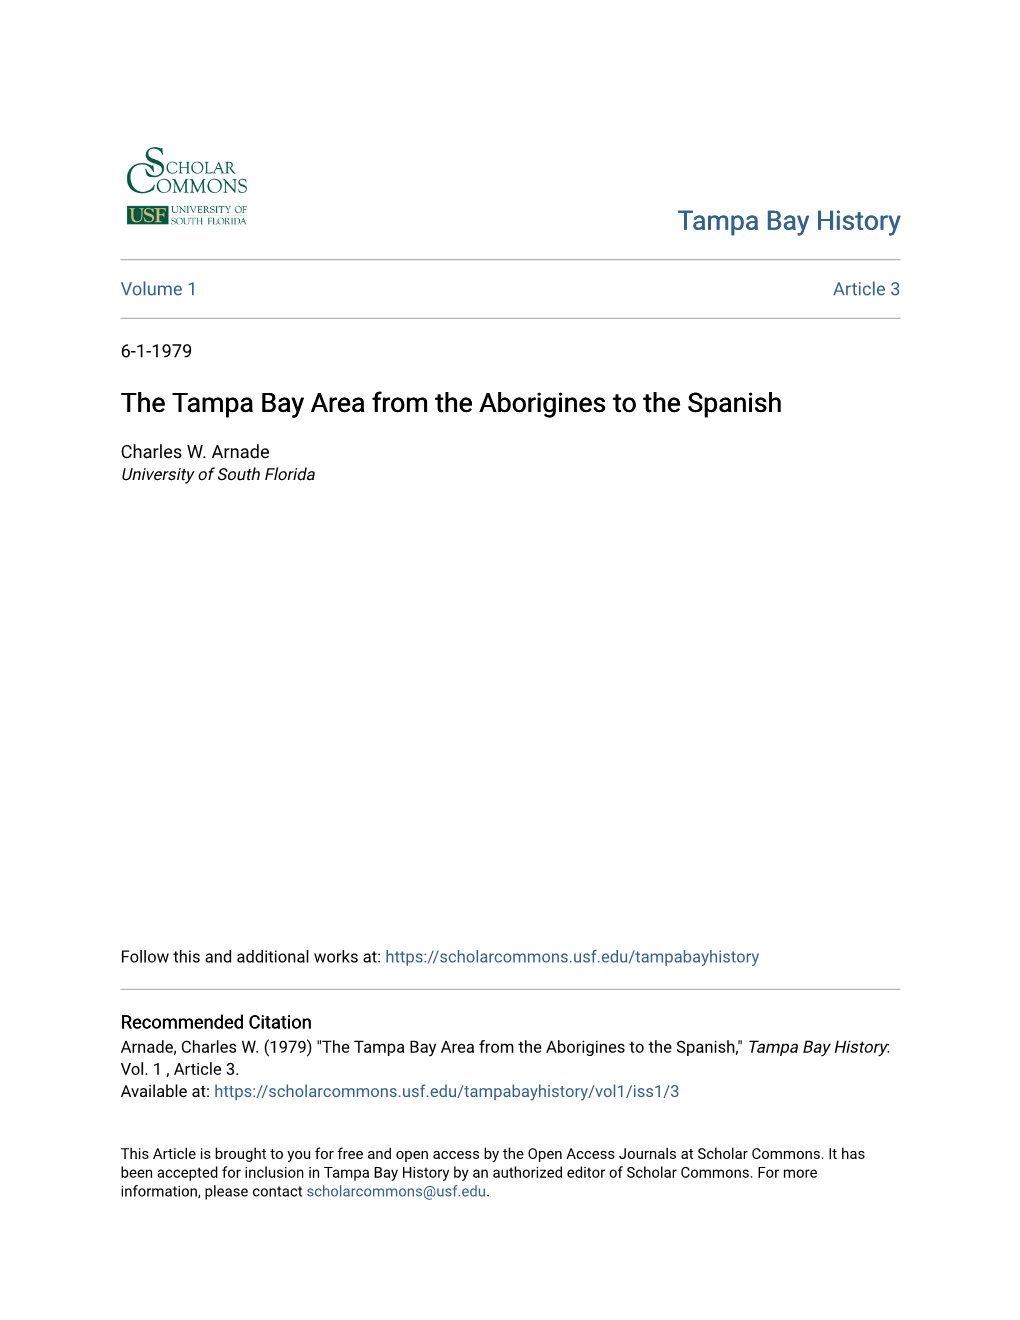 The Tampa Bay Area from the Aborigines to the Spanish